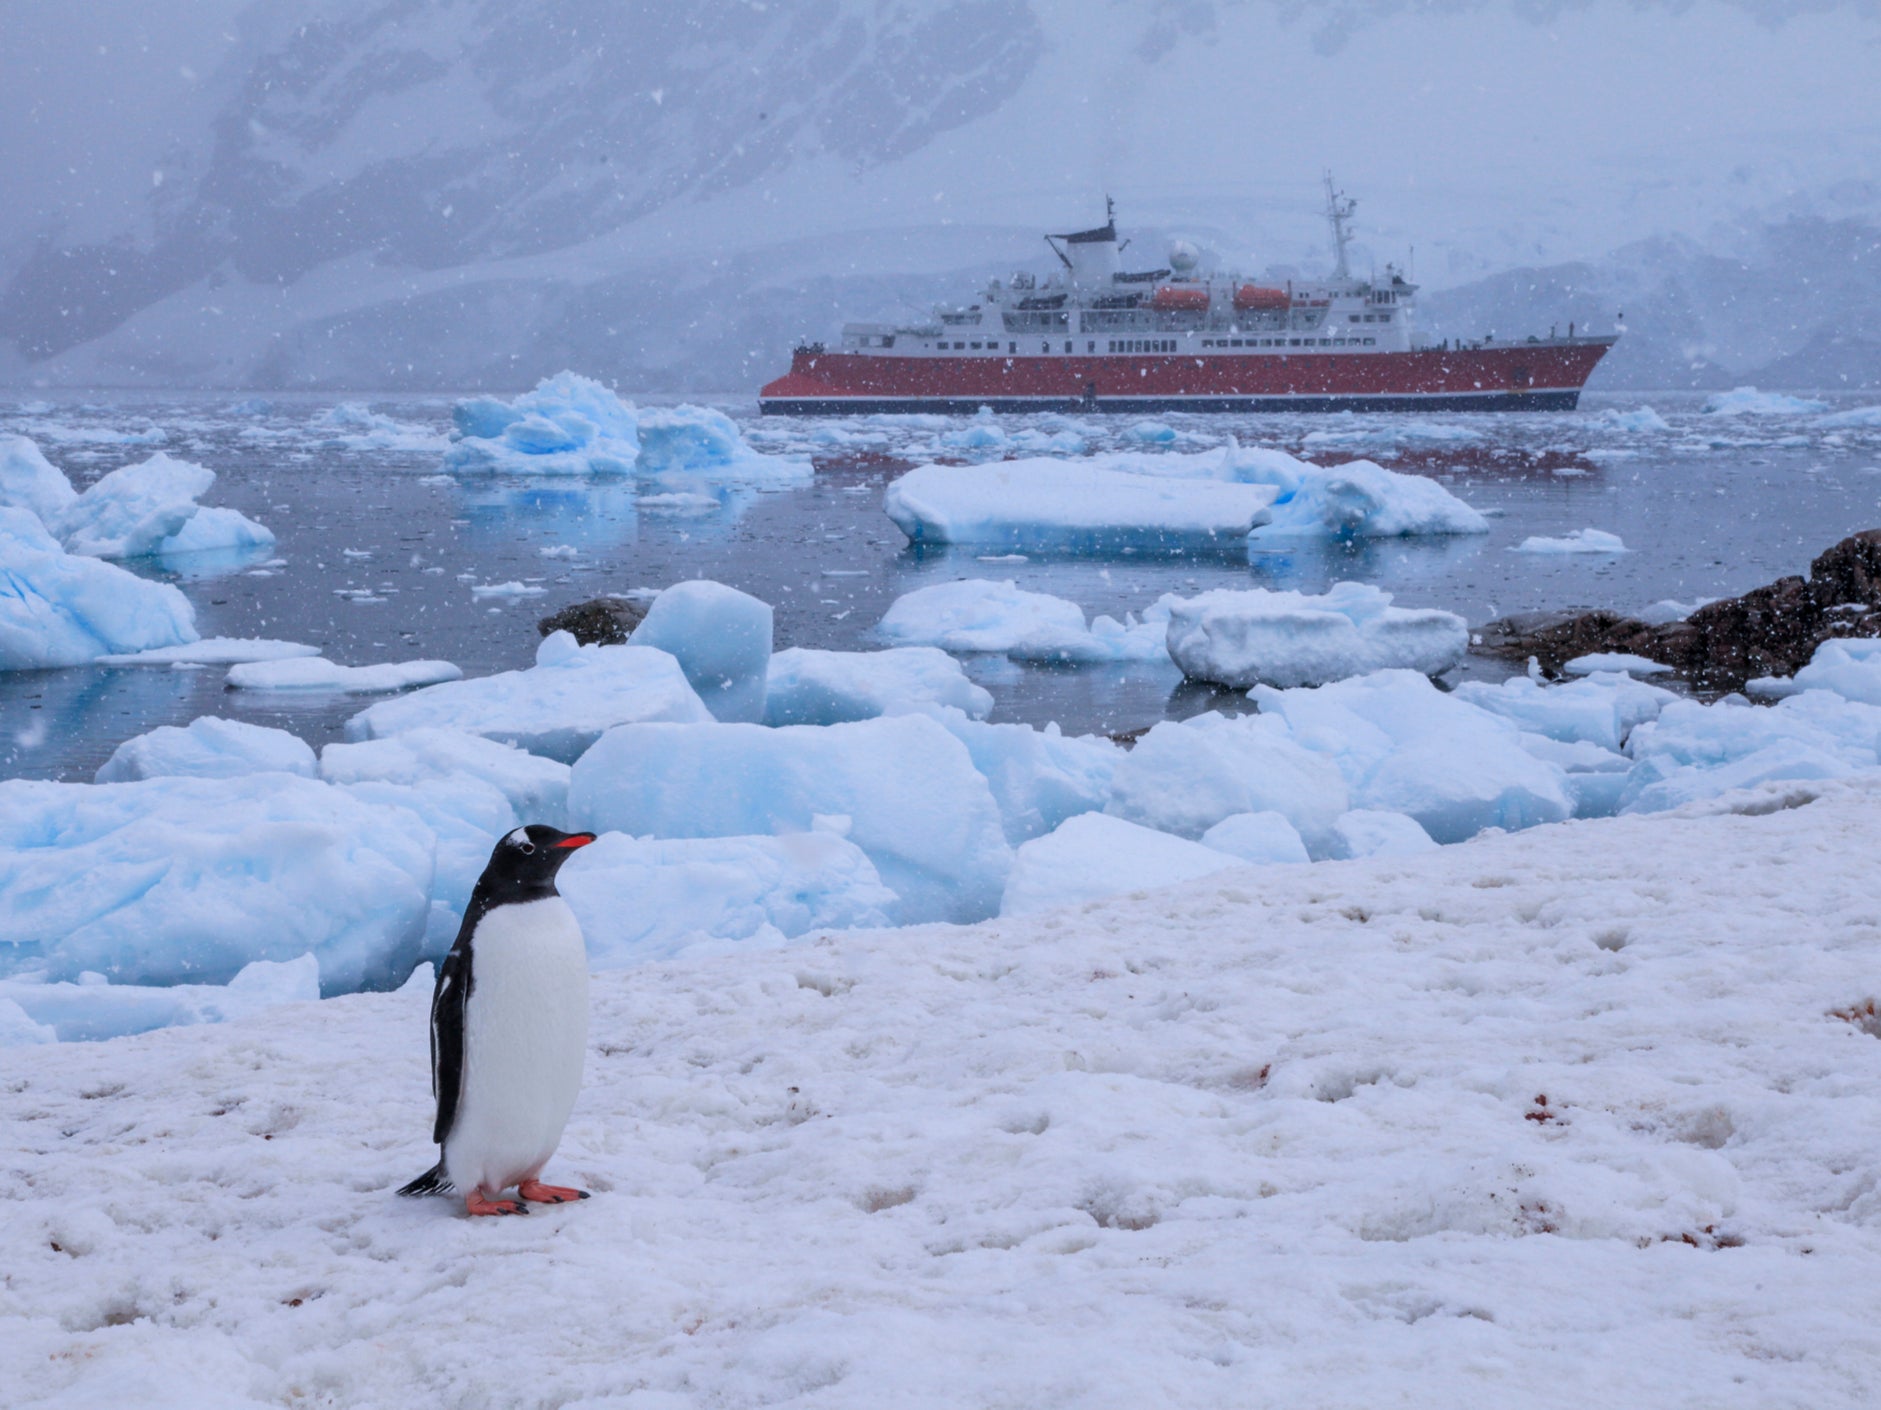 A gentoo penguin surveys the landscape in Antarctica with a research ship behind